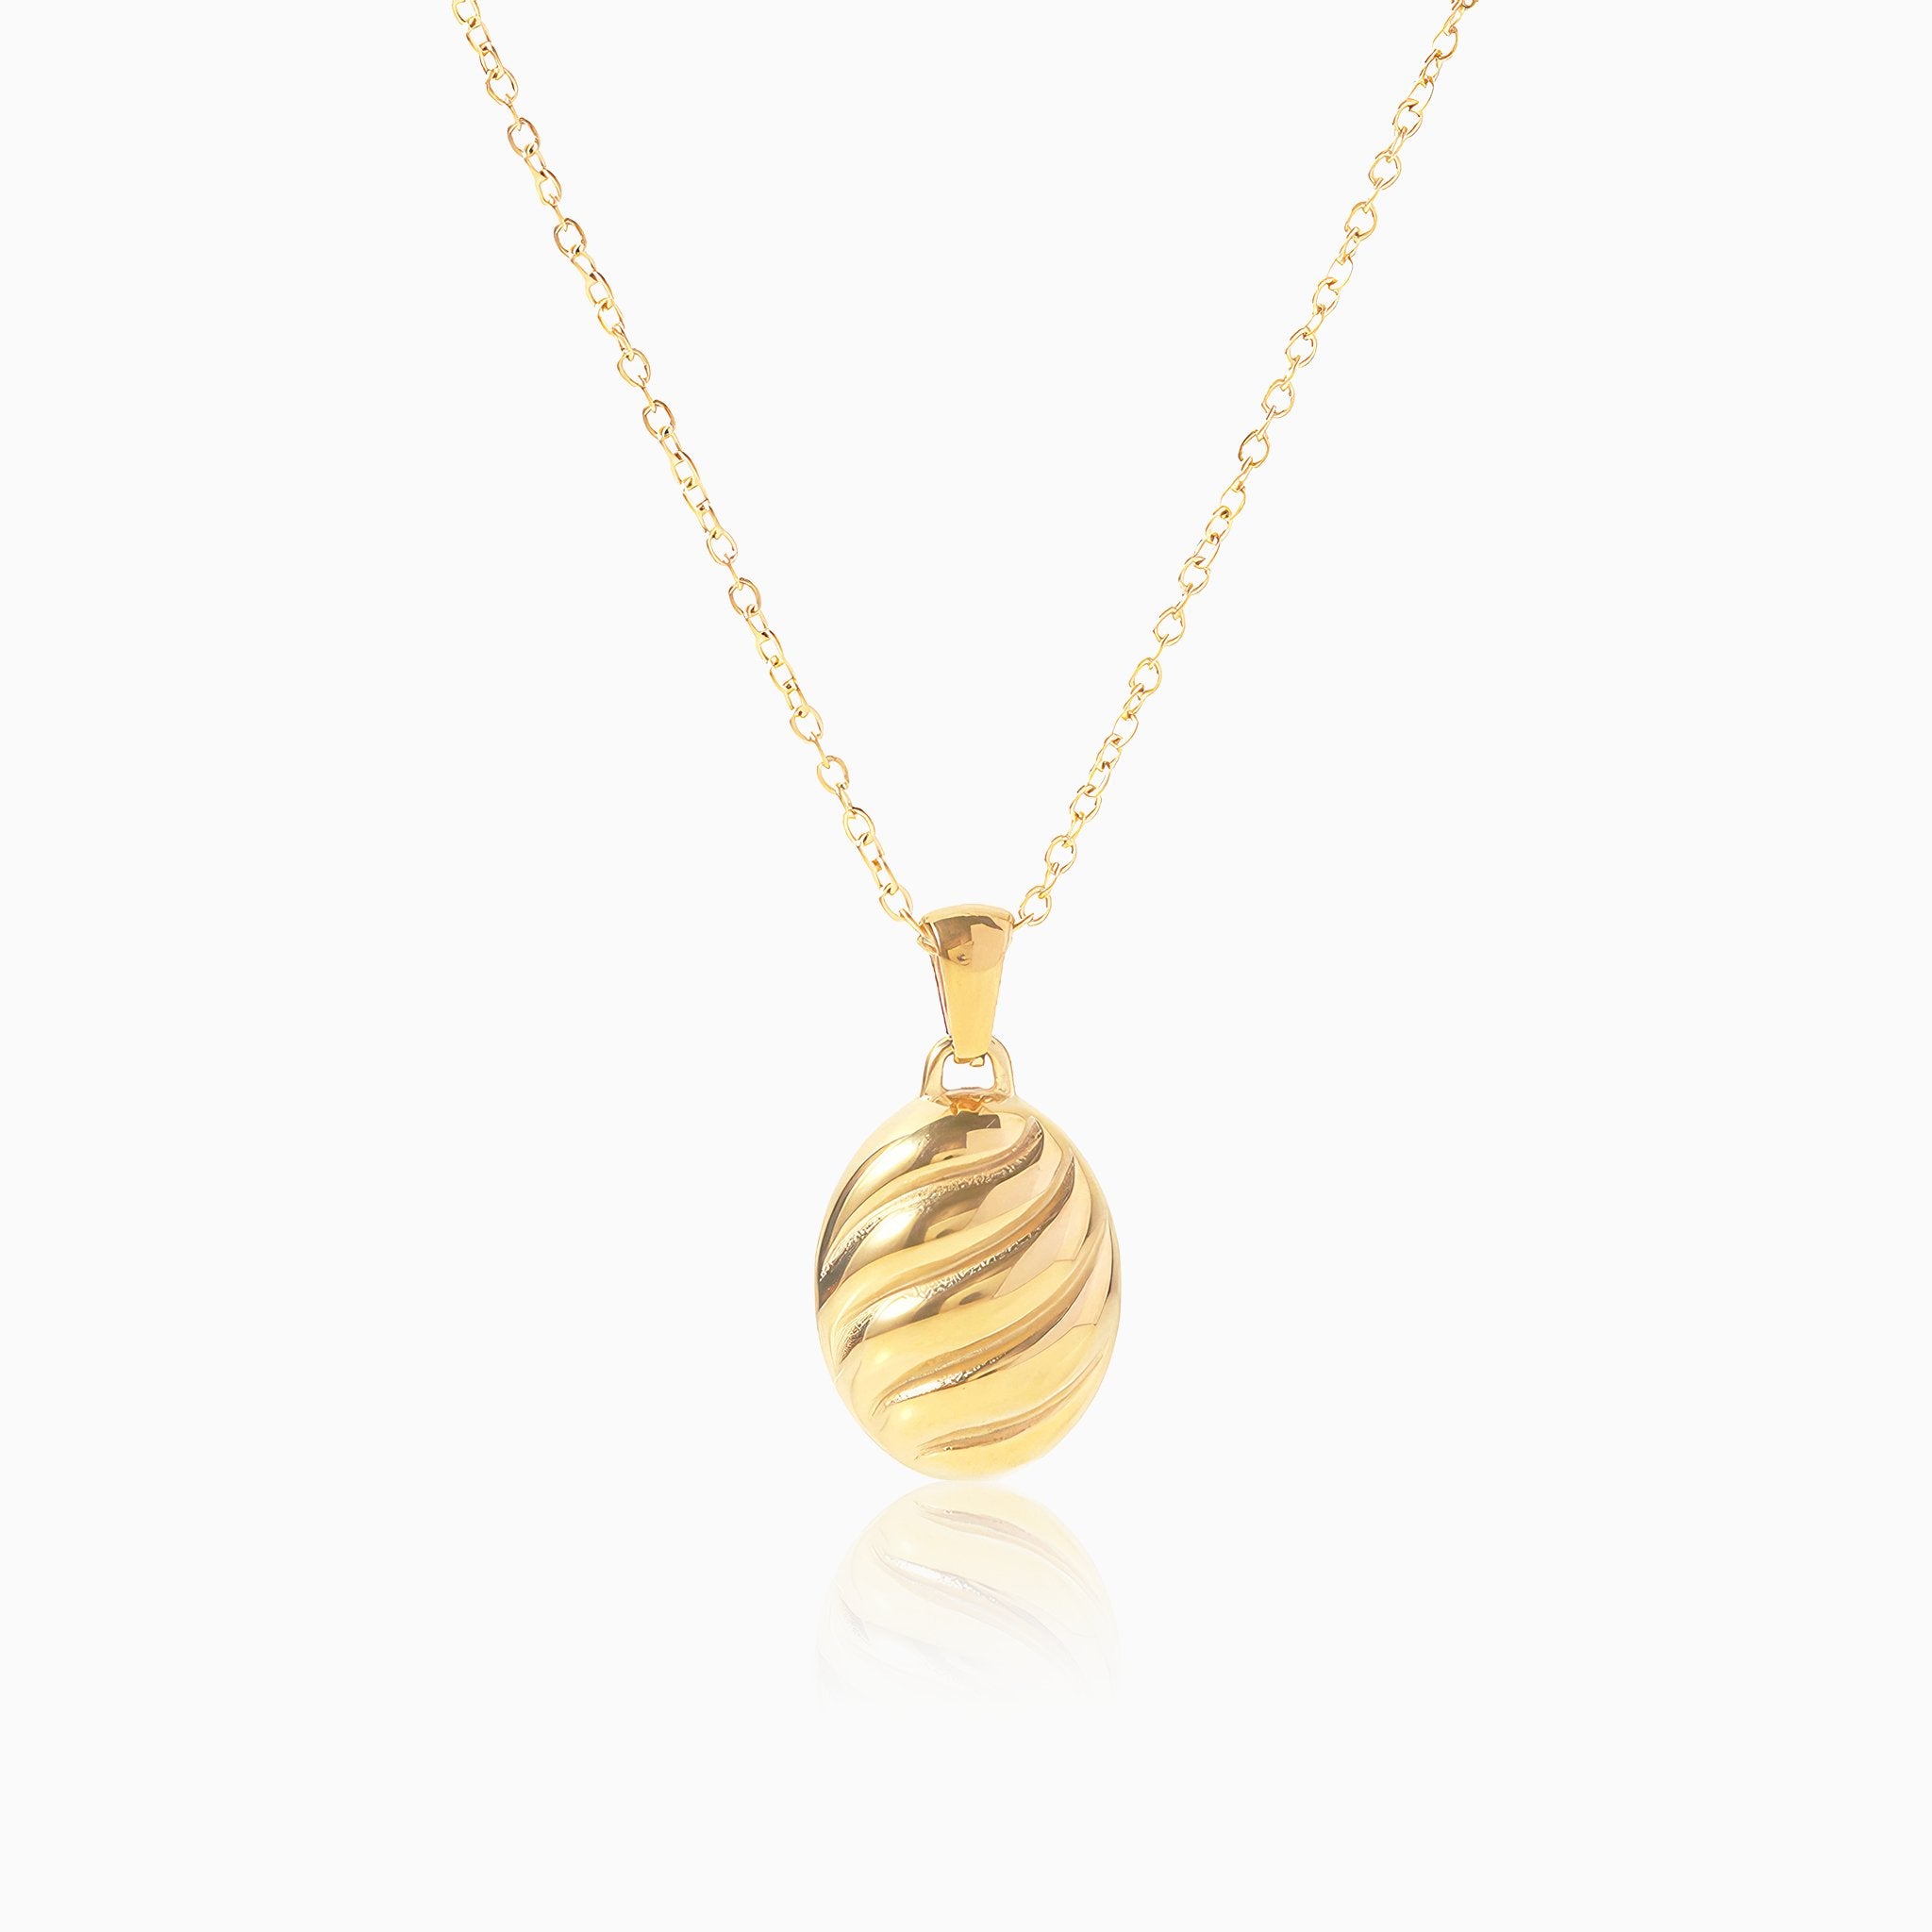 Spiral Necklace in French Style - Nobbier - Necklace - 18K Gold And Titanium PVD Coated Jewelry